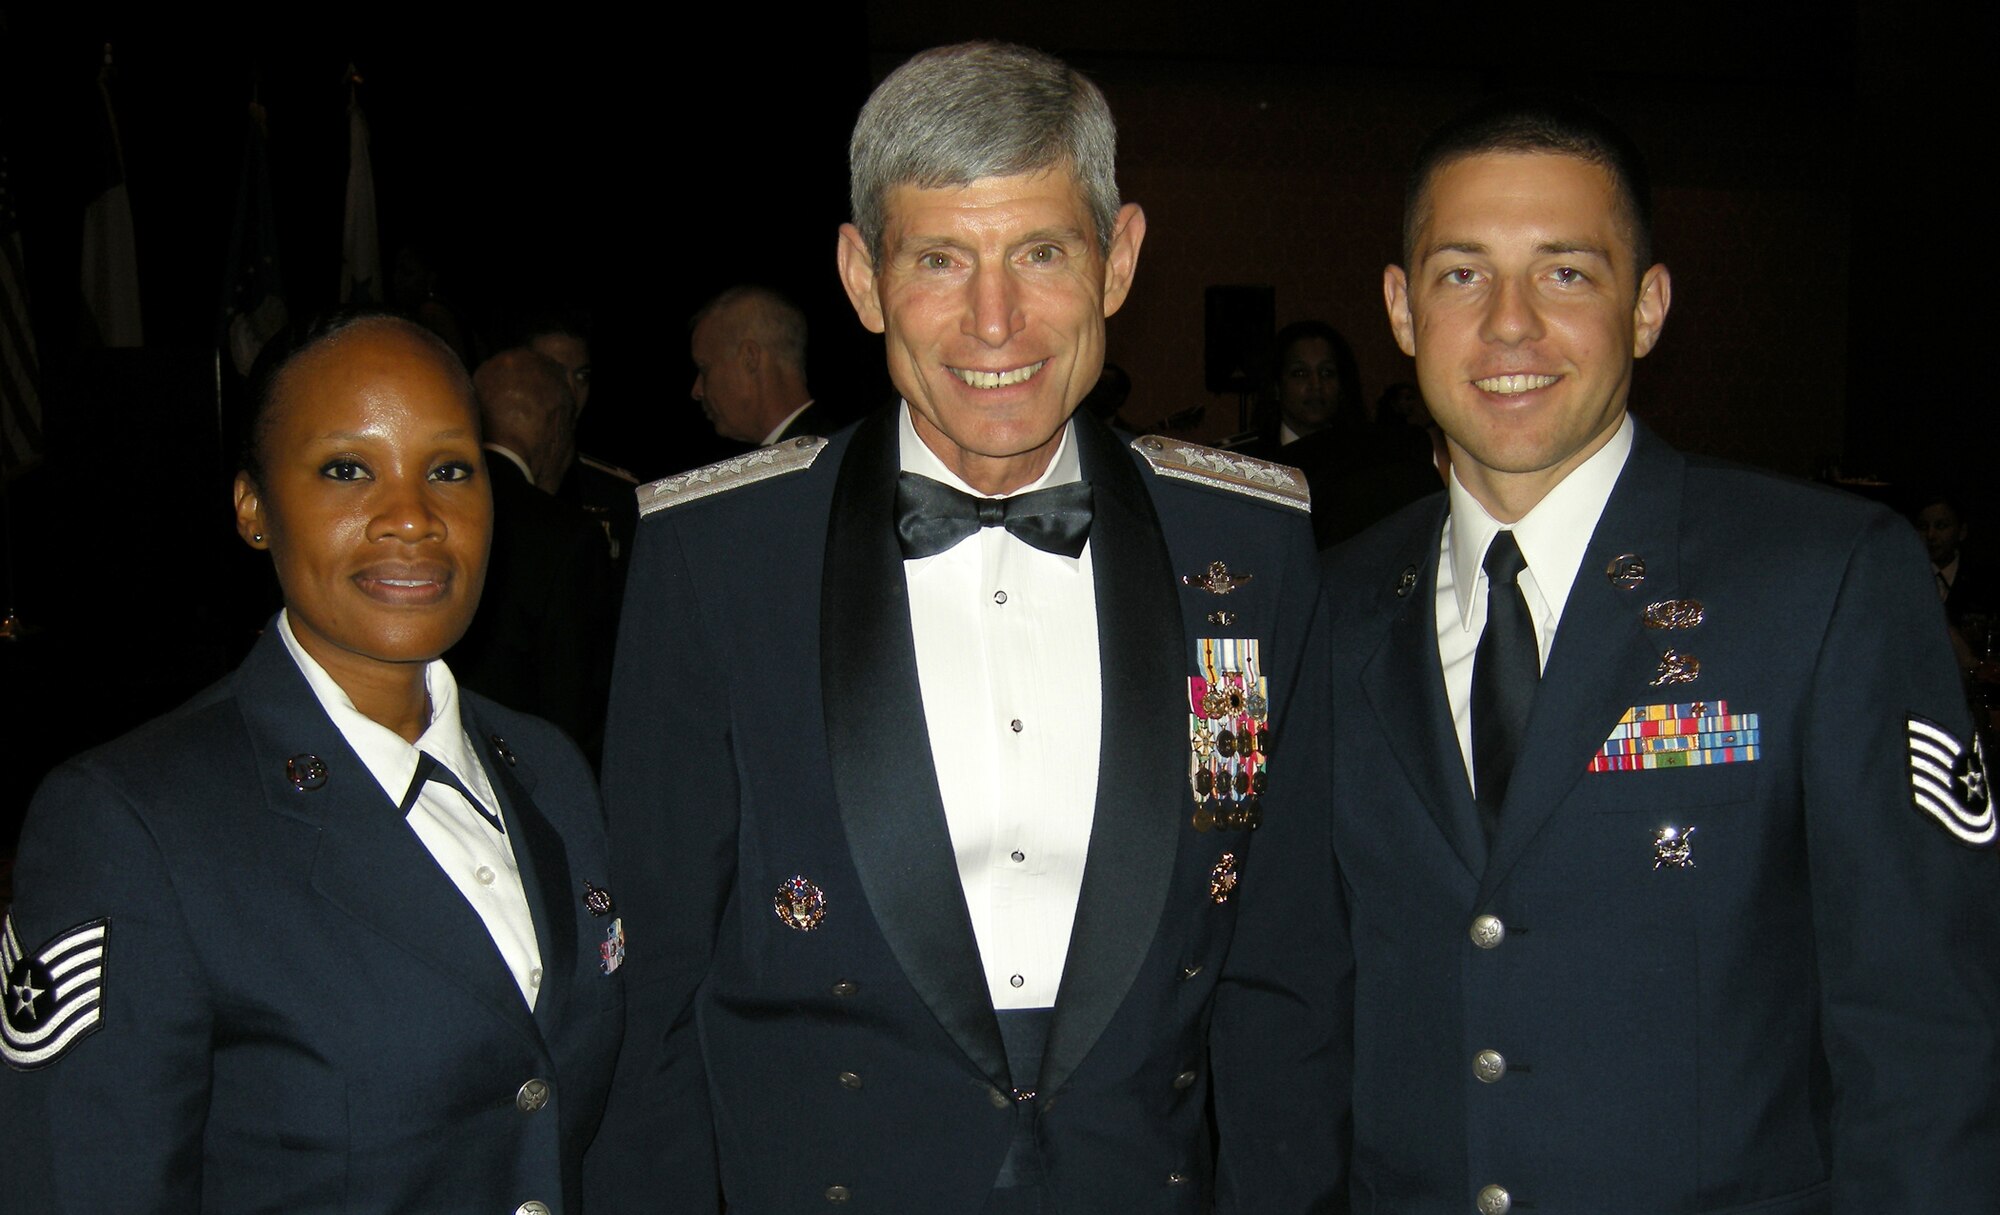 Tech. Sgts. Hope Clark-Vasquez and Christopher Whigham (right) pose with Air Force Chief of Staff Gen. Norton Schwartz July 29 during festivities at the 39th Annual Tuskegee Airmen National Convention in San Antonio. Eight Airmen from the Air Force Reserve's 302nd Airlift Wing attended the event, hearing from senior military leaders on topics including mentoring, women in the military and financial management as well as training on leadership and development. The 302nd AW members also took part in sit-down conversations with surviving members of the famed Tuskegee Airmen "Red Tails" as they described their experiences from World War II and the military in general to the AF Reservists. The conference attendance was part of a series of career broadening events sponsored by the 302nd AW's Human Resources Development Council. (Courtesy photo)